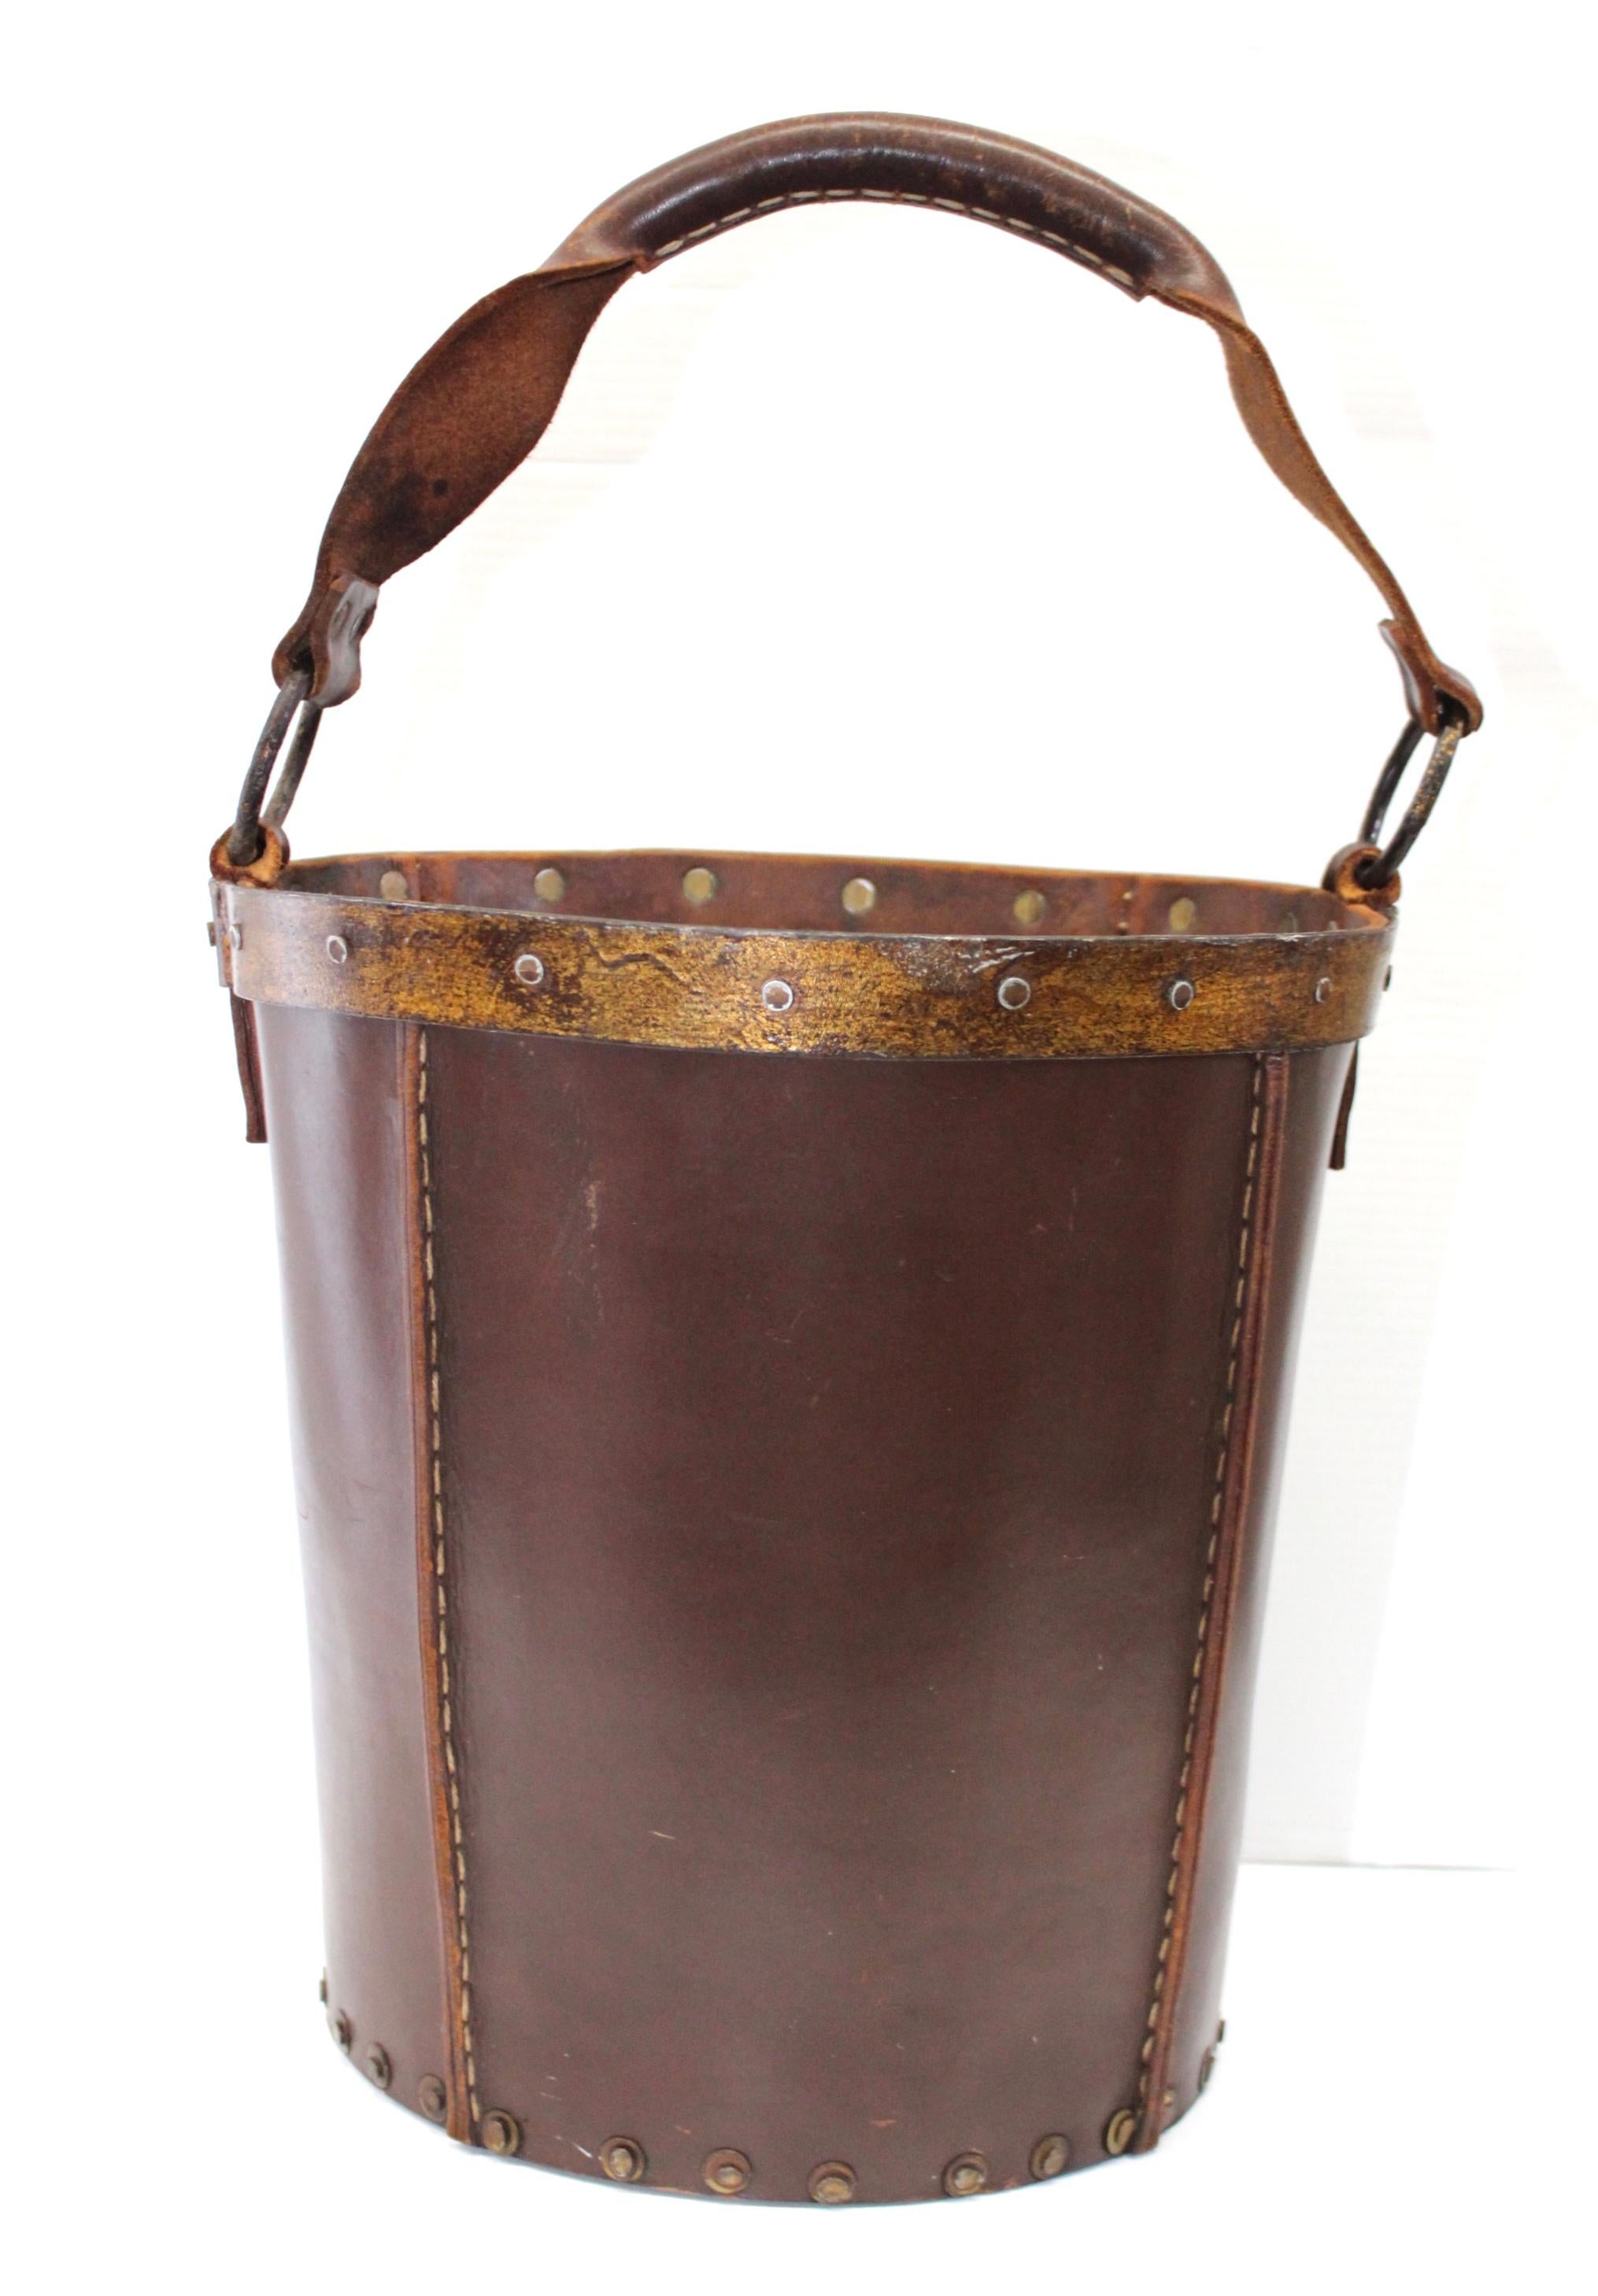 1940s leather, metal and wood wastebasket from Spain, beautiful craftsmanship with stitching detail and nice patina to the leather.

Measures: Height including handle 21”.